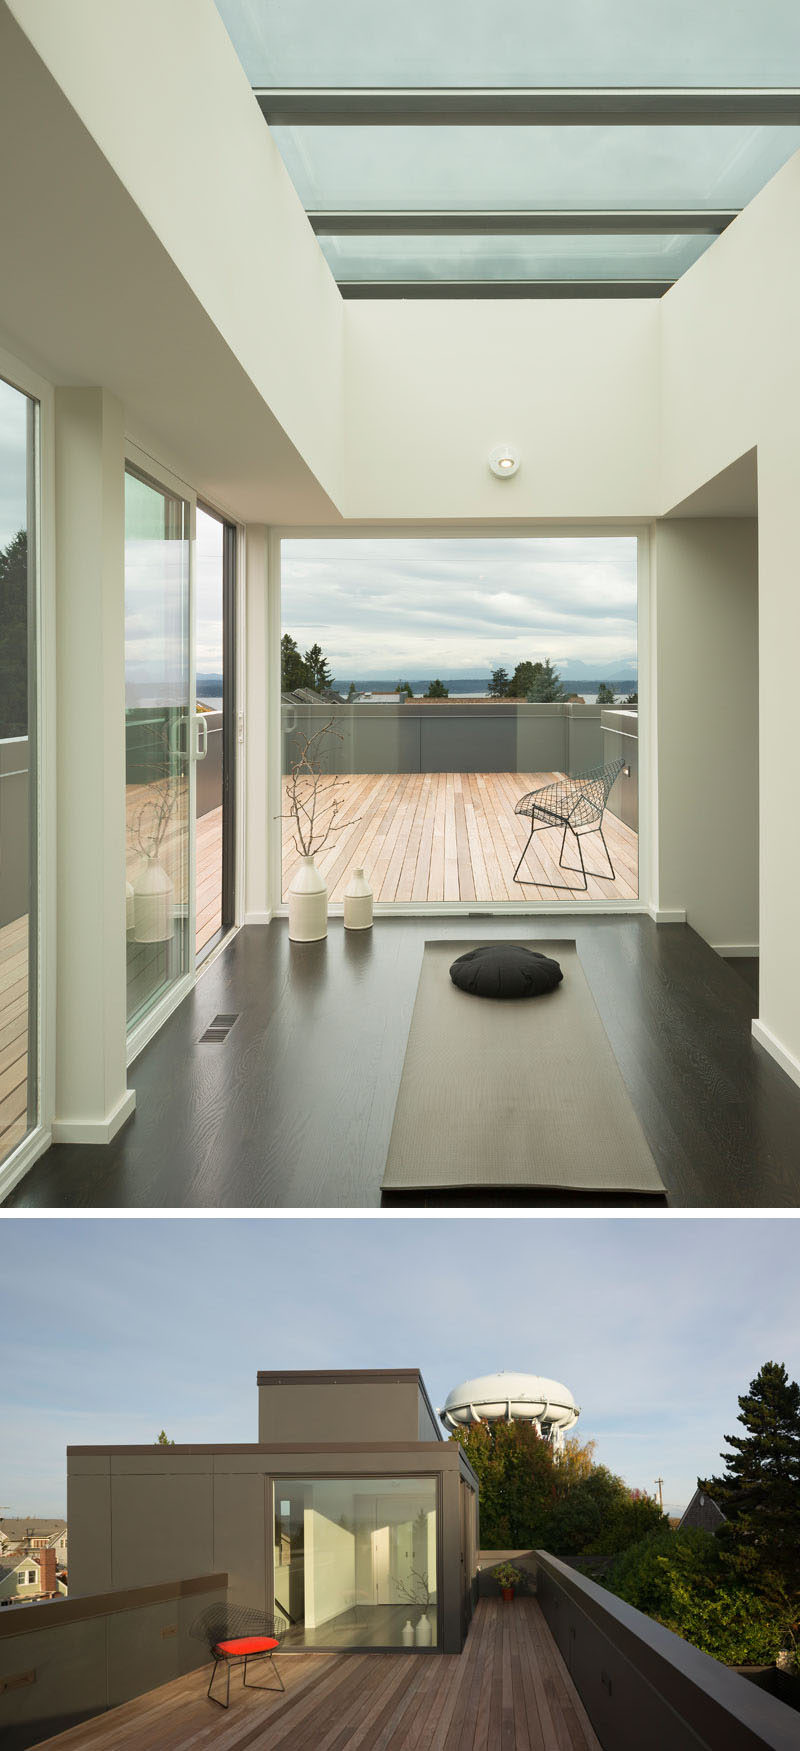 At the top of this modern house, there's a private yoga studio that opens up onto a rooftop deck with views of the neighborhood.